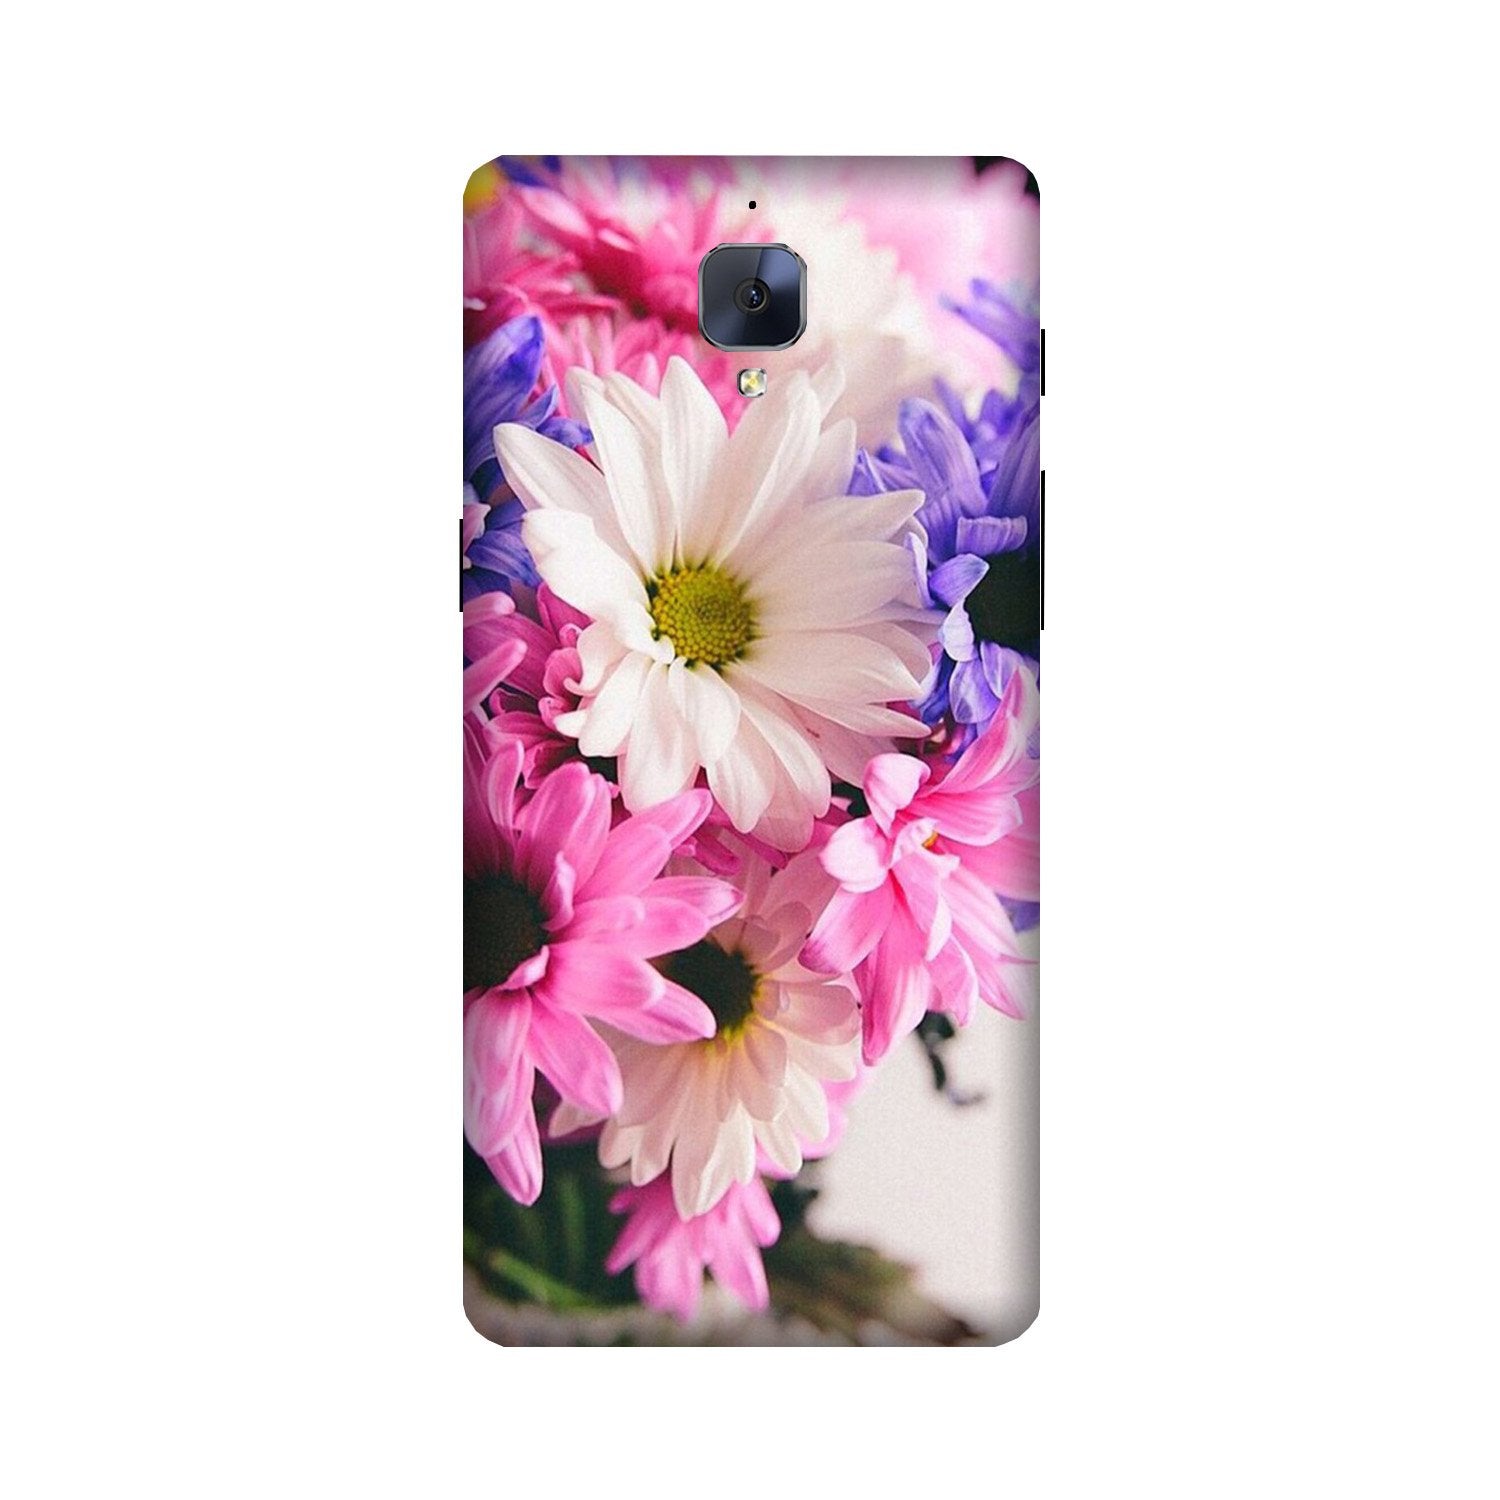 Coloful Daisy Case for OnePlus 3/ 3T